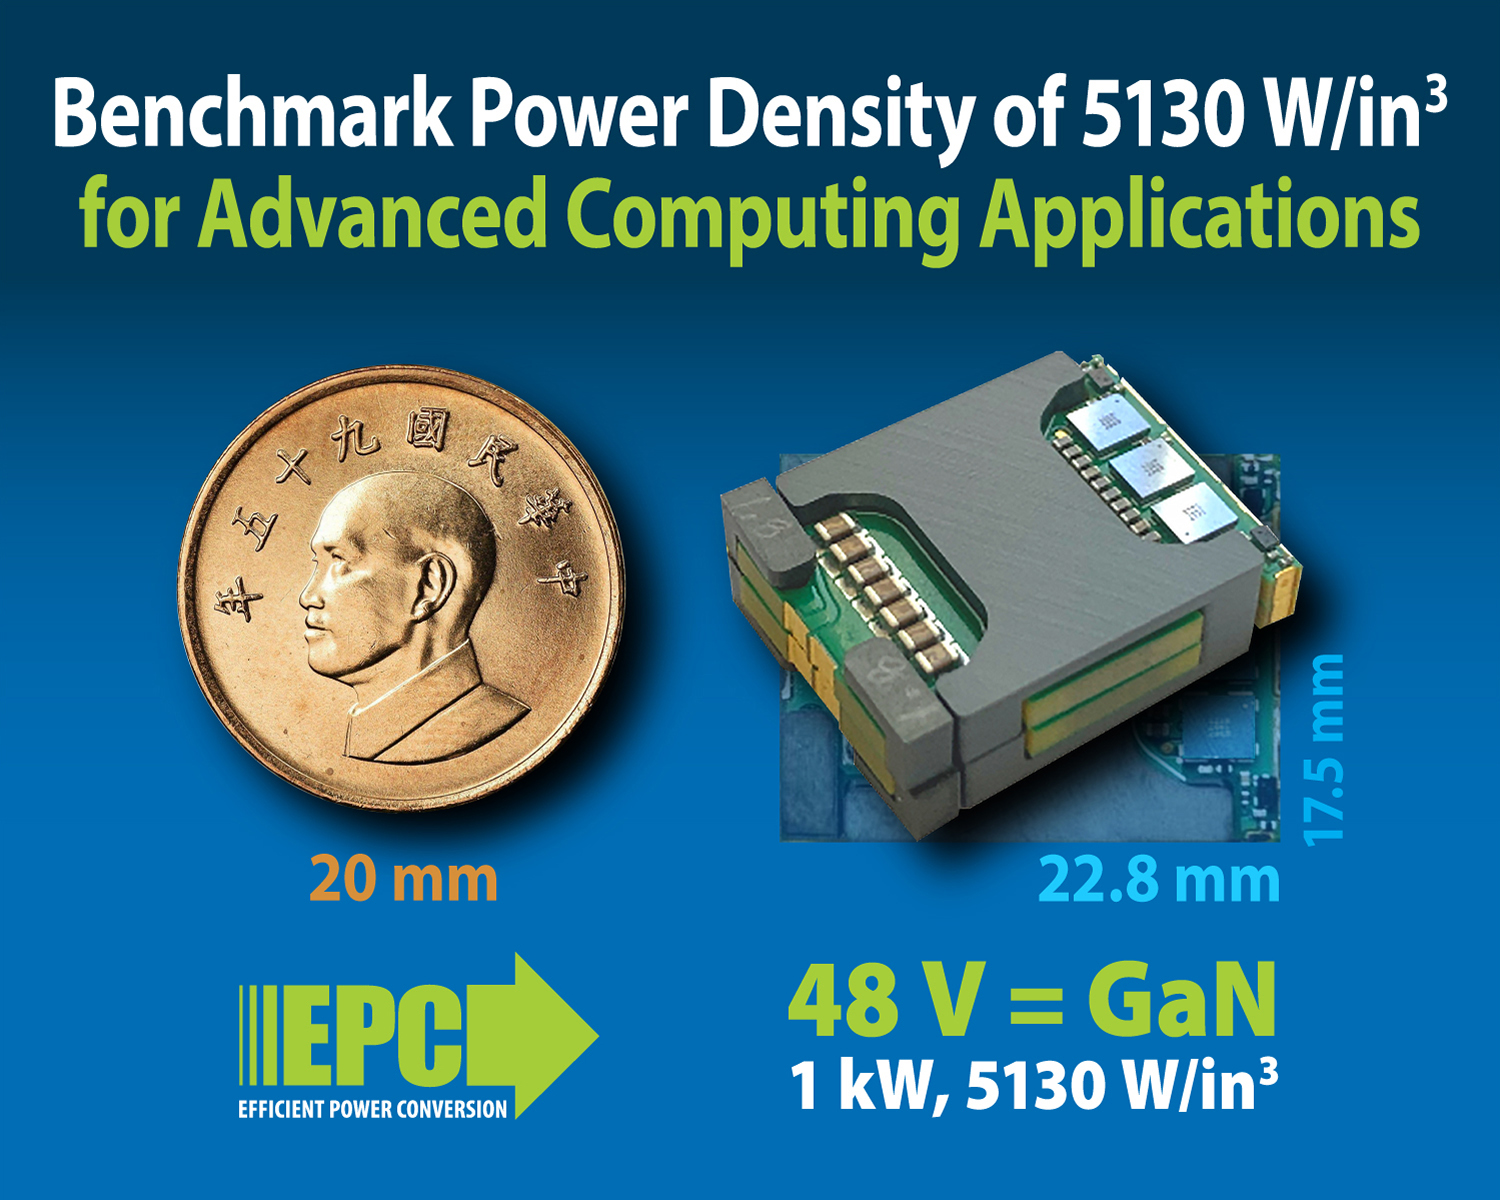 Benchmark Power Density of 5130 W/in3 with GaN FETs Powers Artificial Intelligence and Advanced Computing Applications